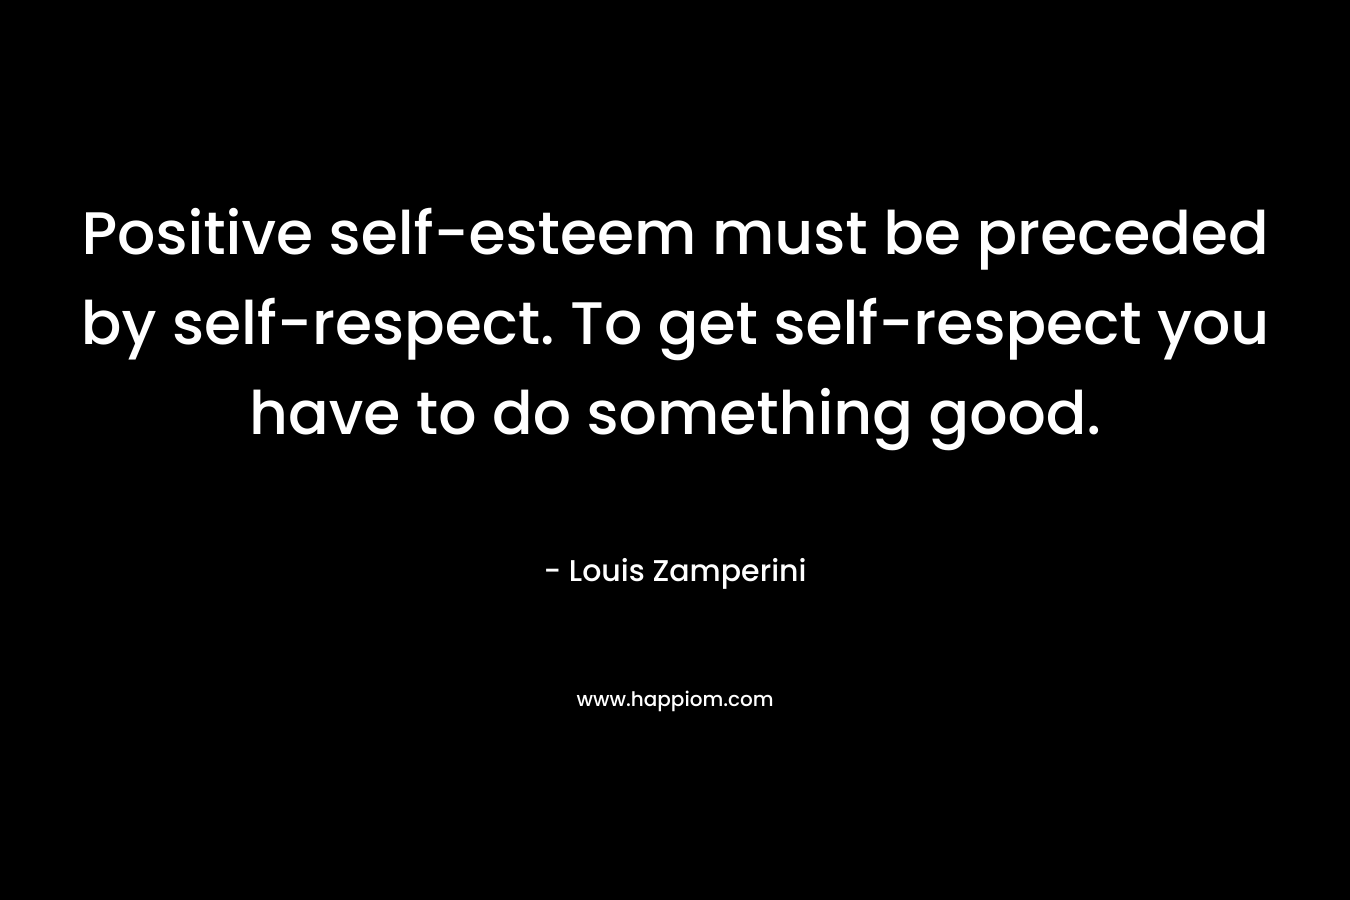 Positive self-esteem must be preceded by self-respect. To get self-respect you have to do something good.